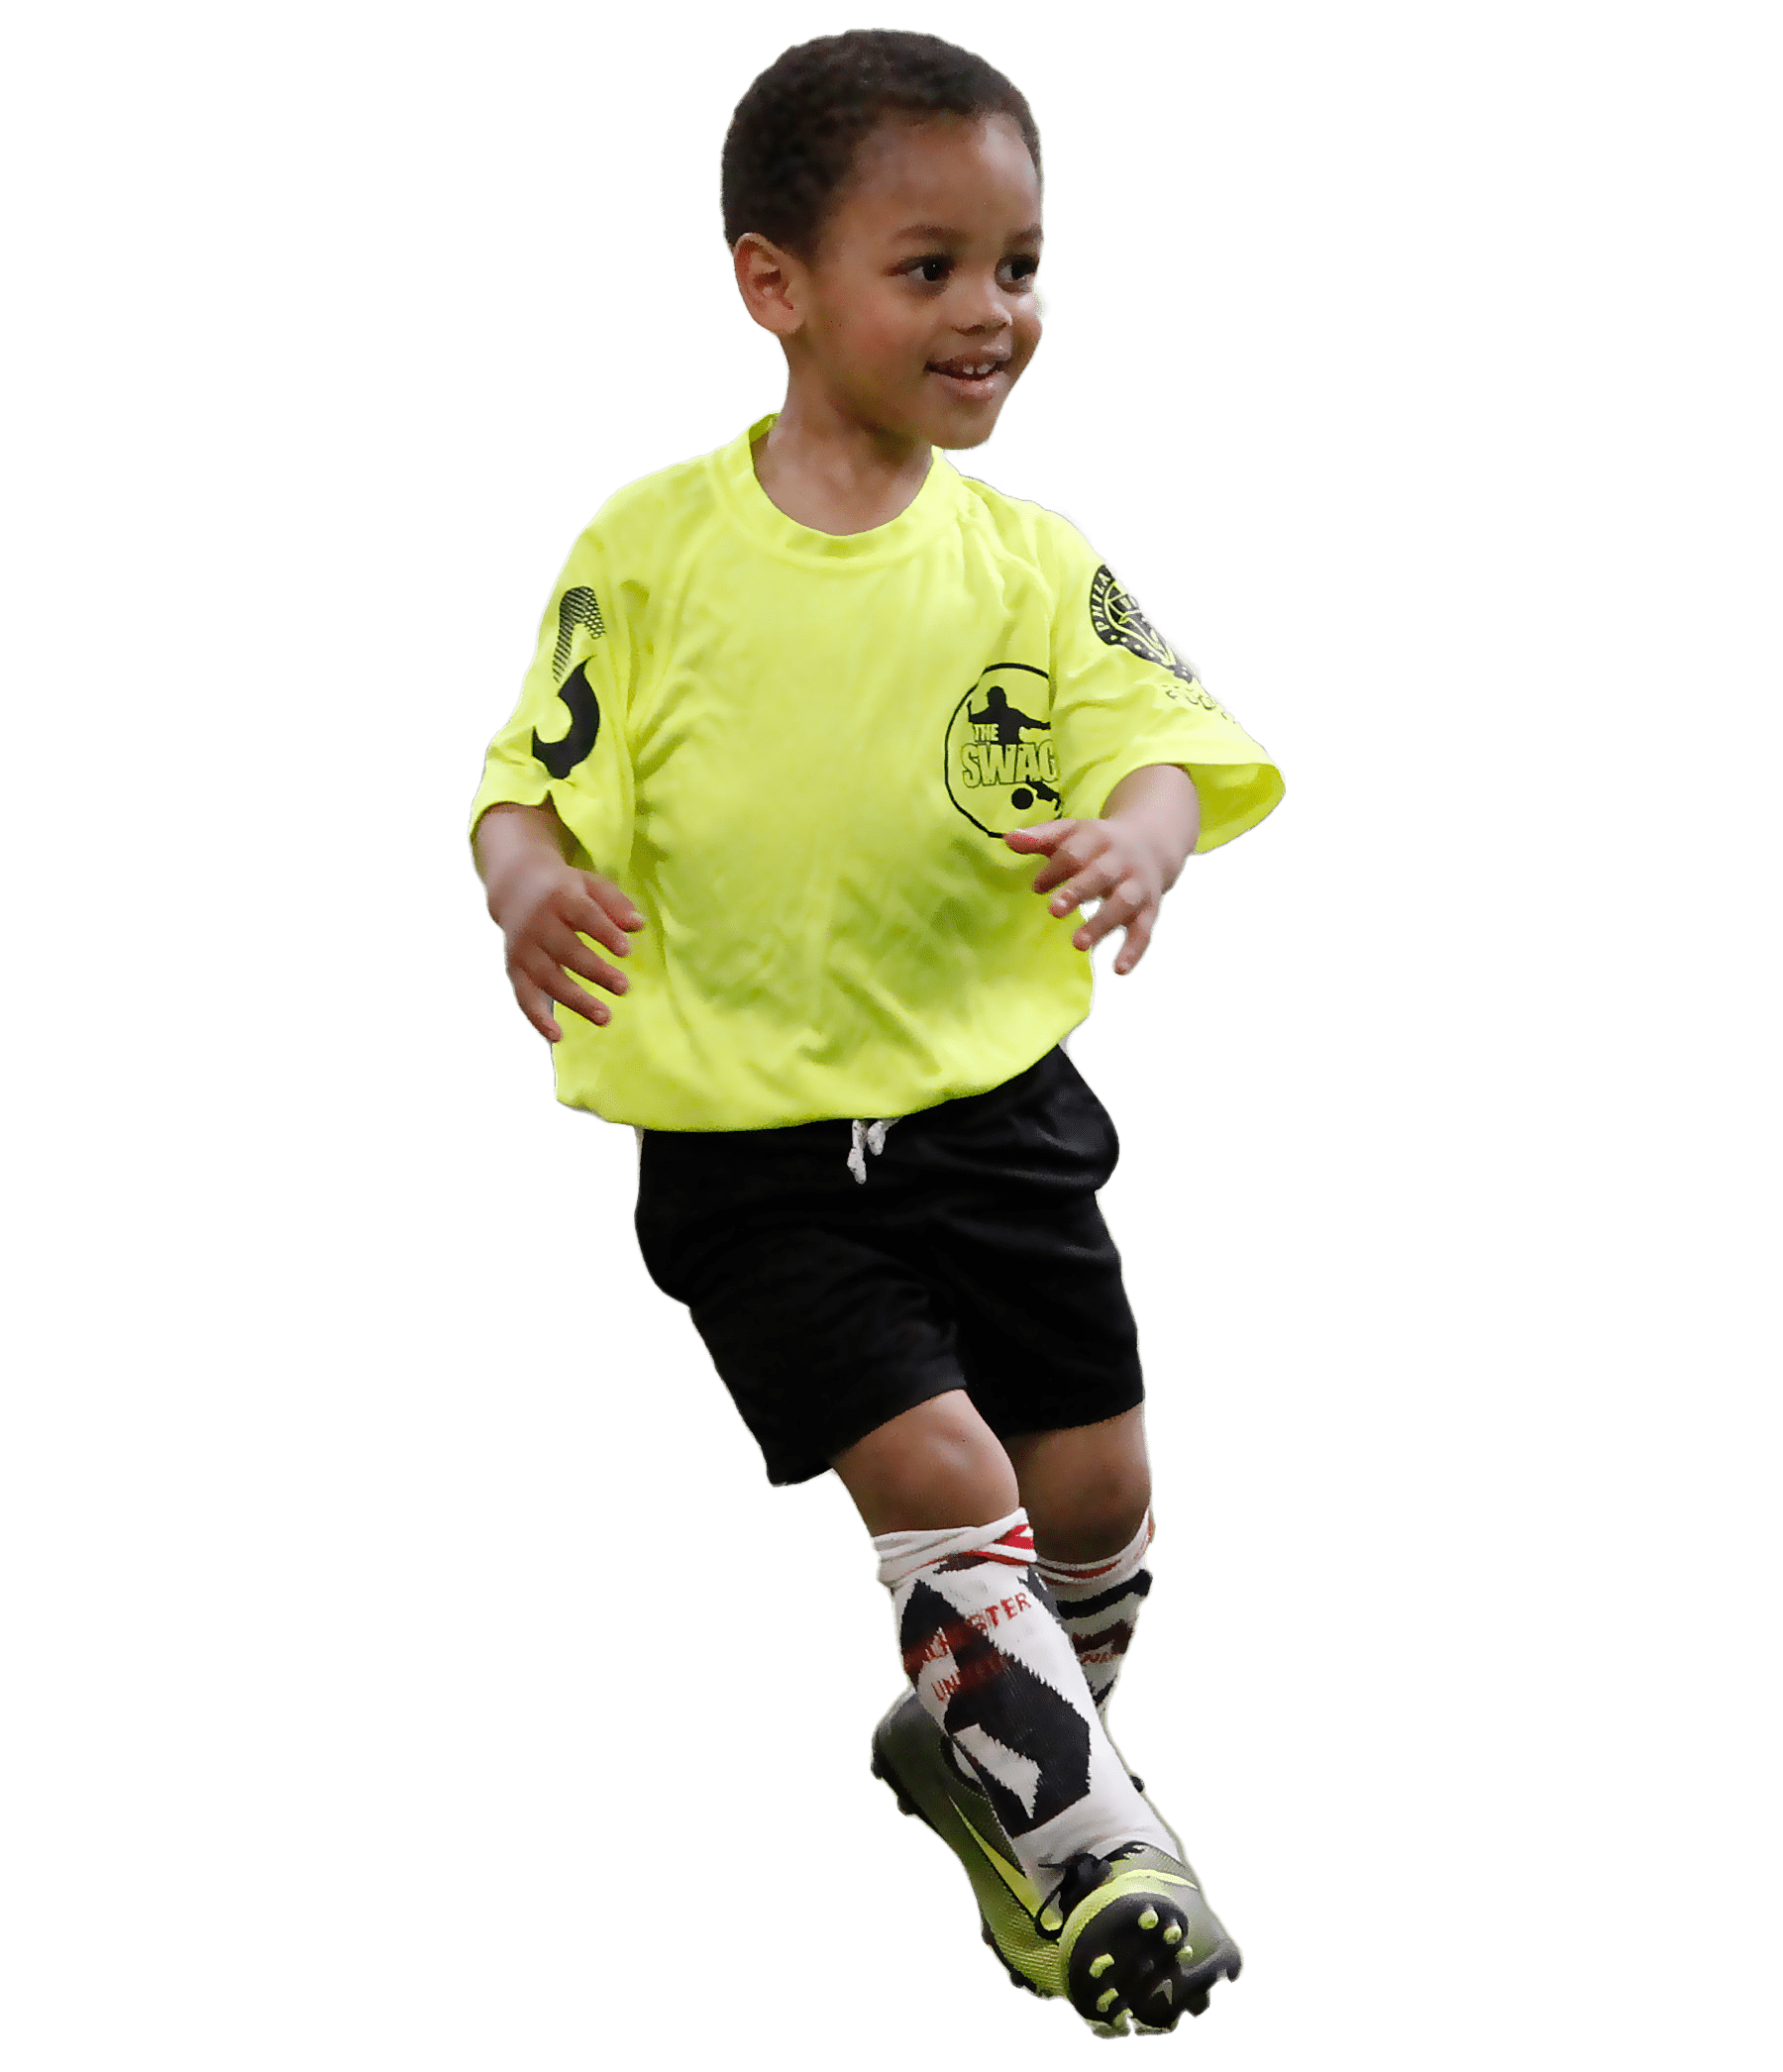 Child playing soccer